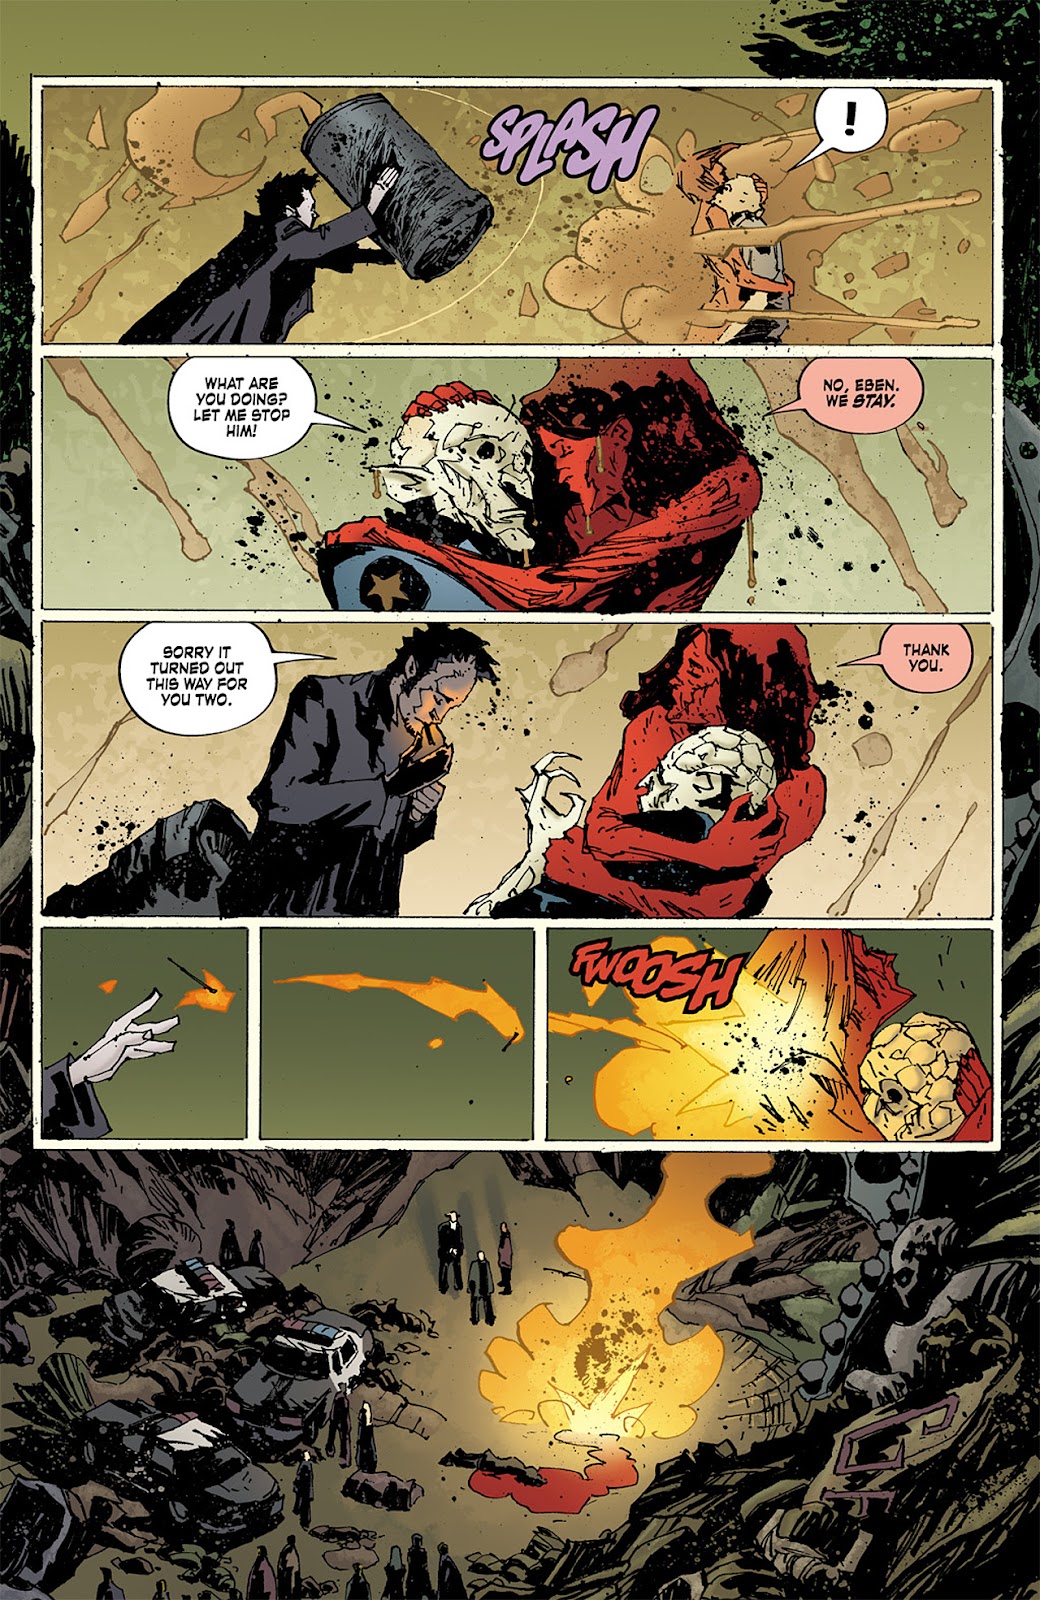 Criminal Macabre: Final Night - The 30 Days of Night Crossover issue 4 - Page 22